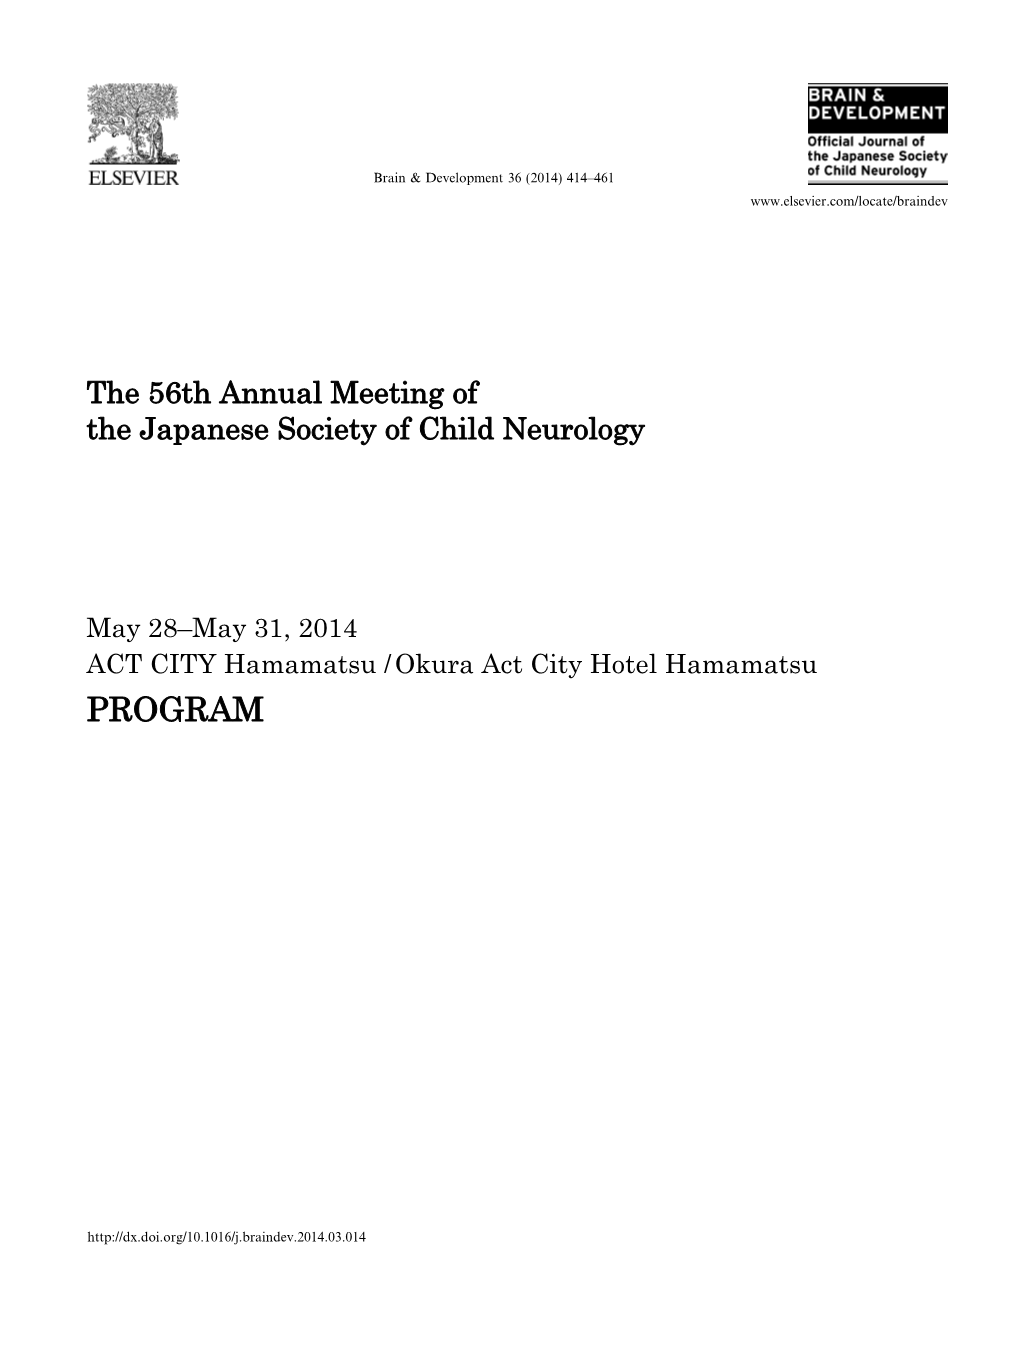 The 56Th Annual Meeting of the Japanese Society of Child Neurology